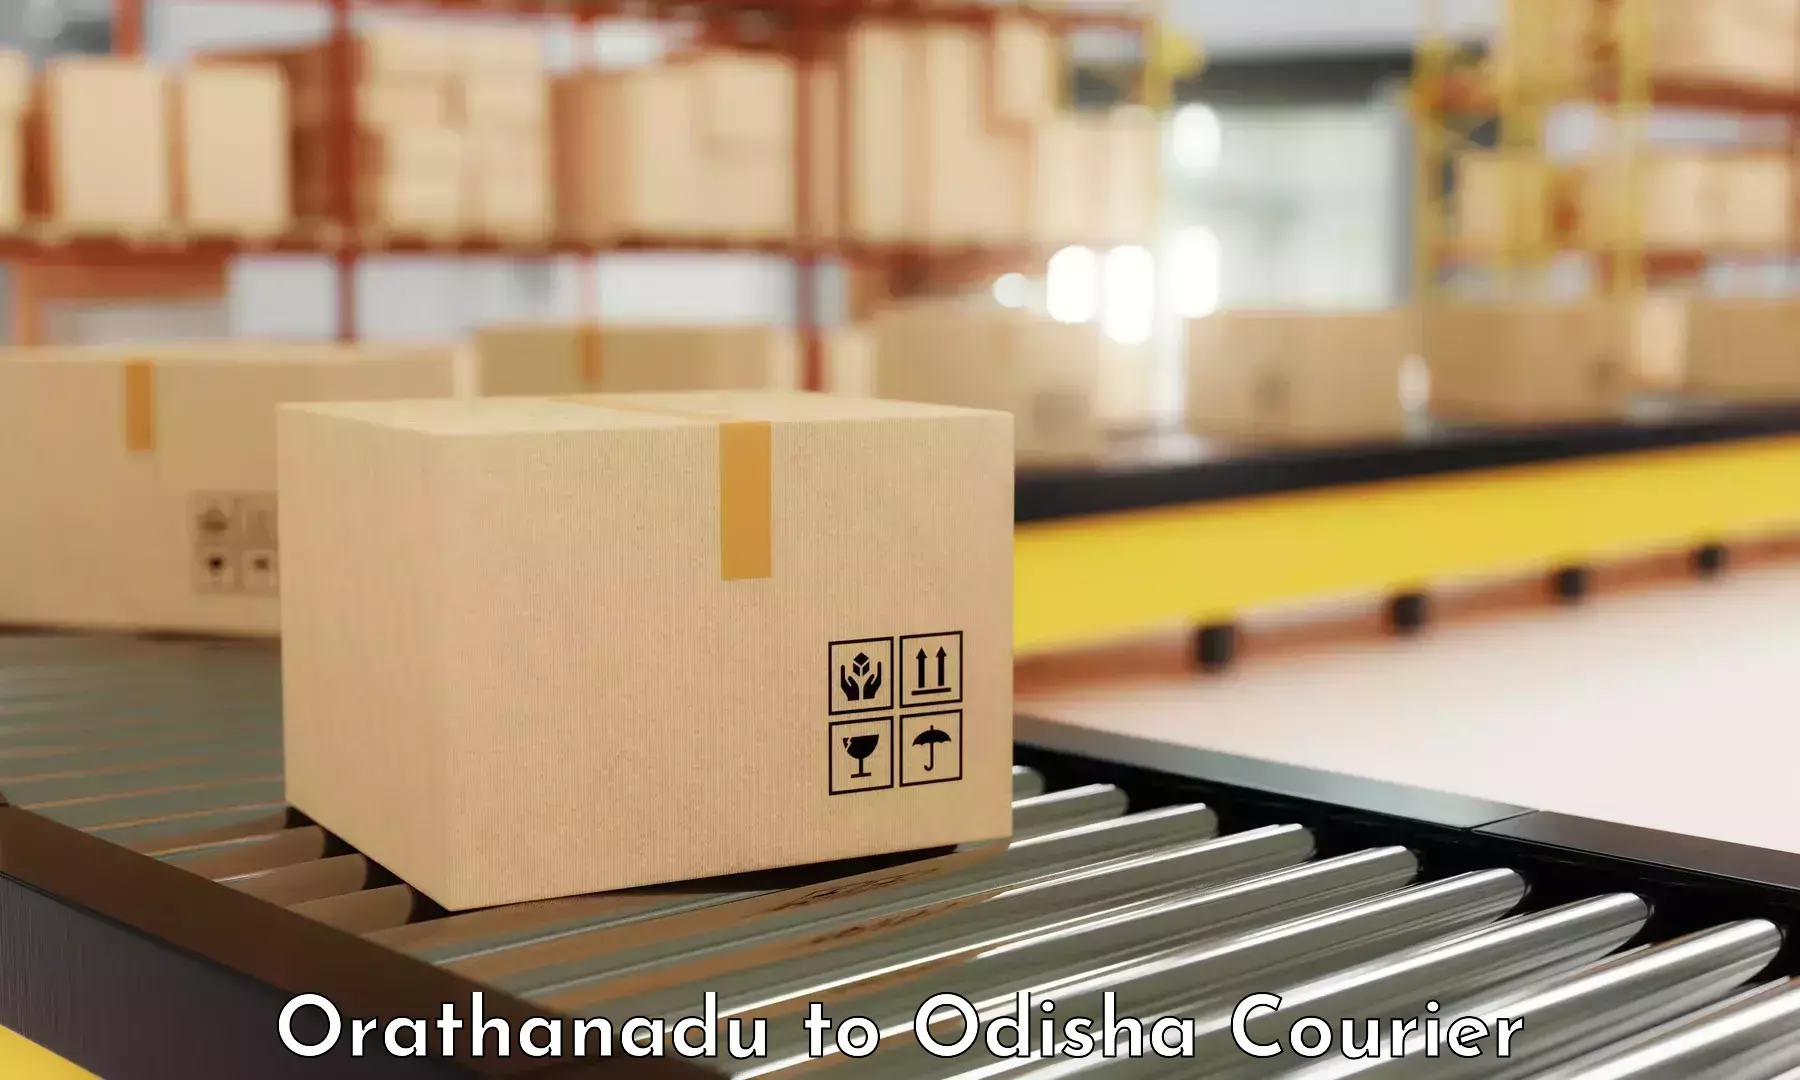 State-of-the-art courier technology Orathanadu to Chandinchowk